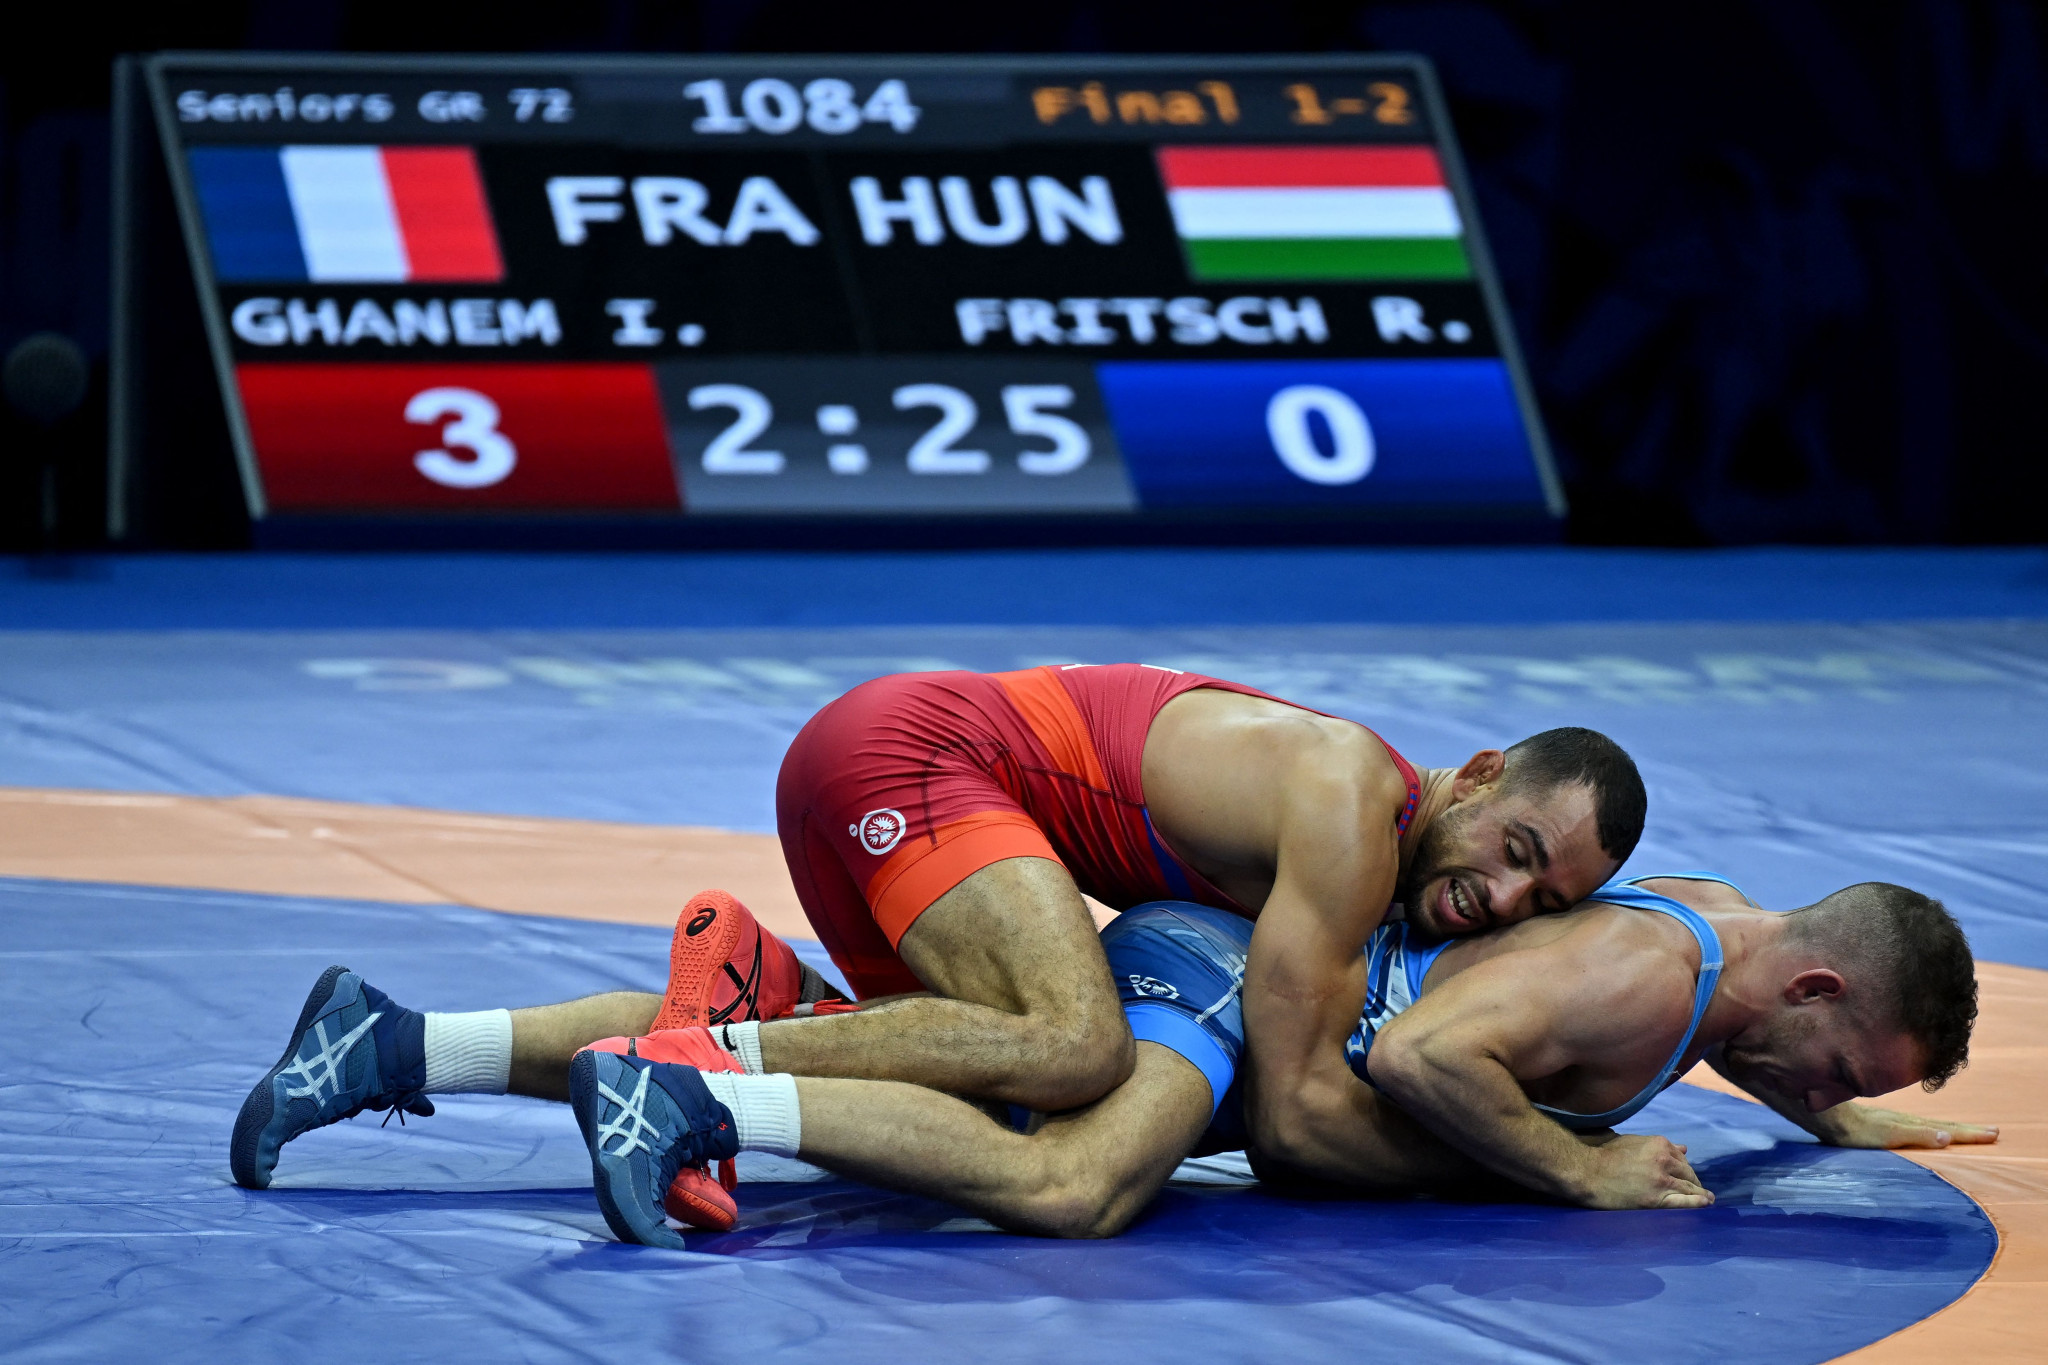 Ibrahim Mahmoud Hamed Hassan Ghanem of France, in red, on his way to victory in the men's 72kg final at the World Wrestling Championships ©Getty Images